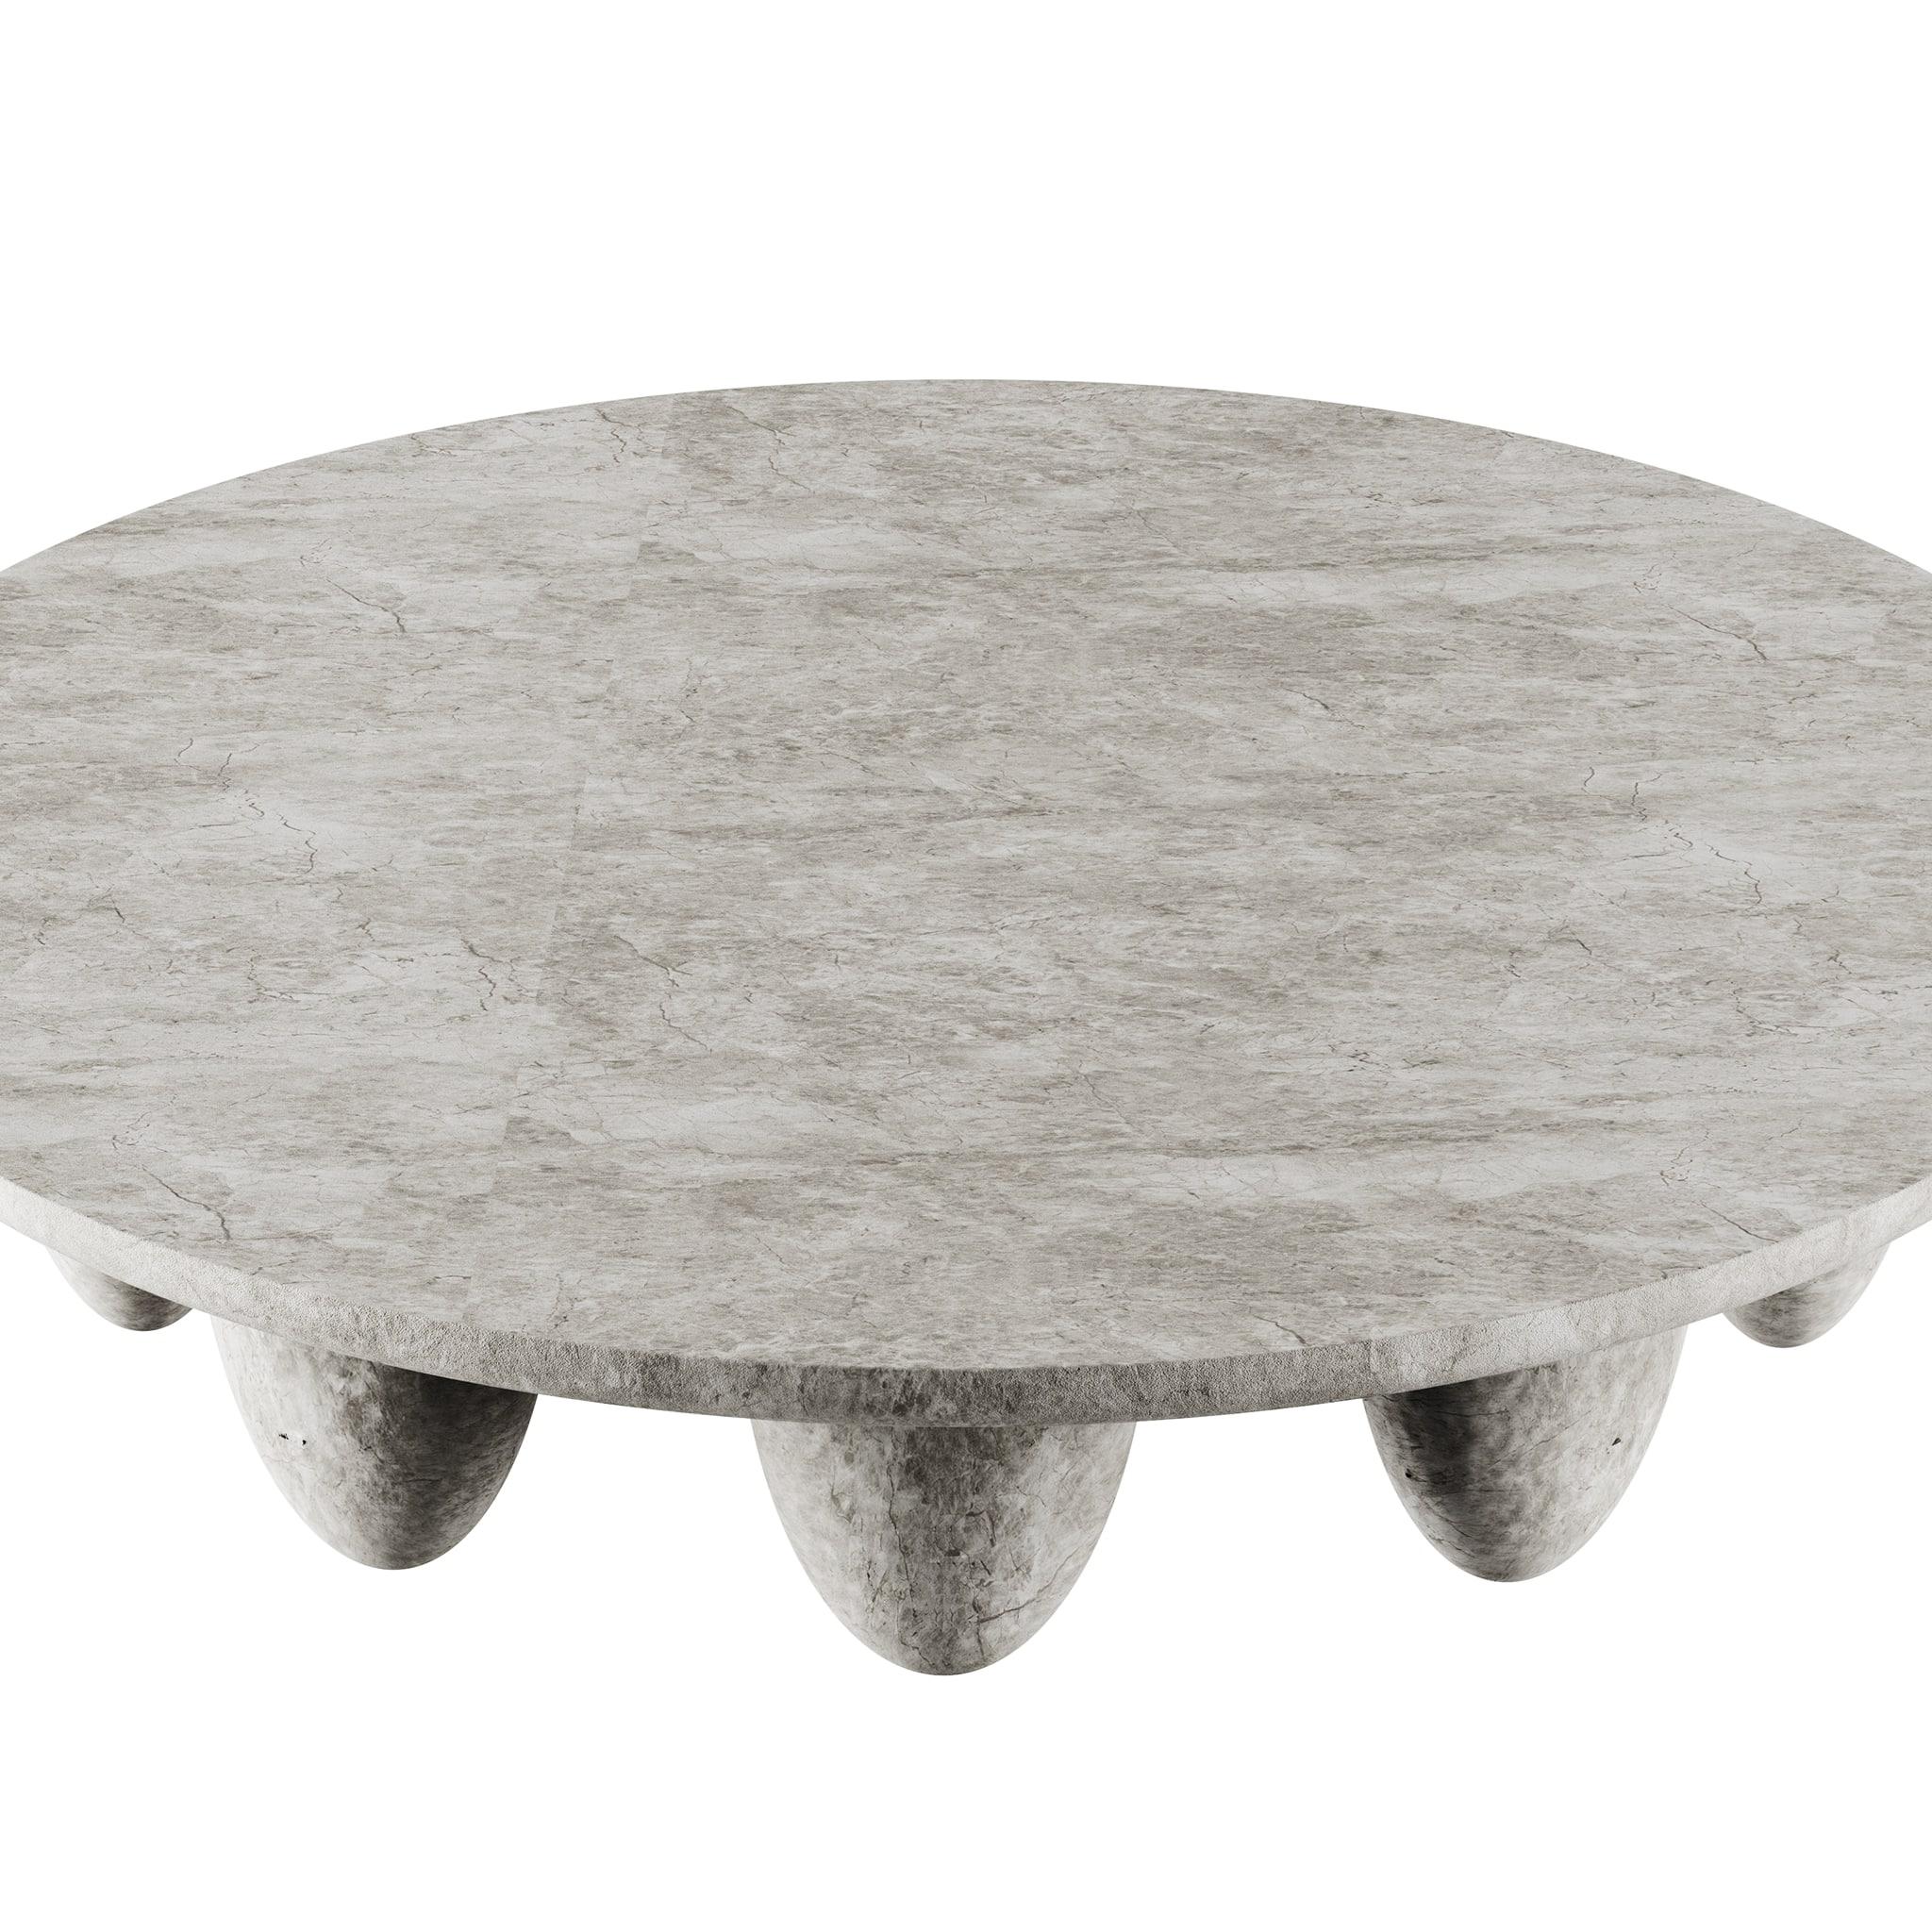 Lunarys Center Table Grigio Tundra is an outstanding modern design piece. The modern outdoor center table’s voluptuous anatomy and soft texture are perfect for indoor or outdoor projects. Defined by a refined and rounded silhouette, this large